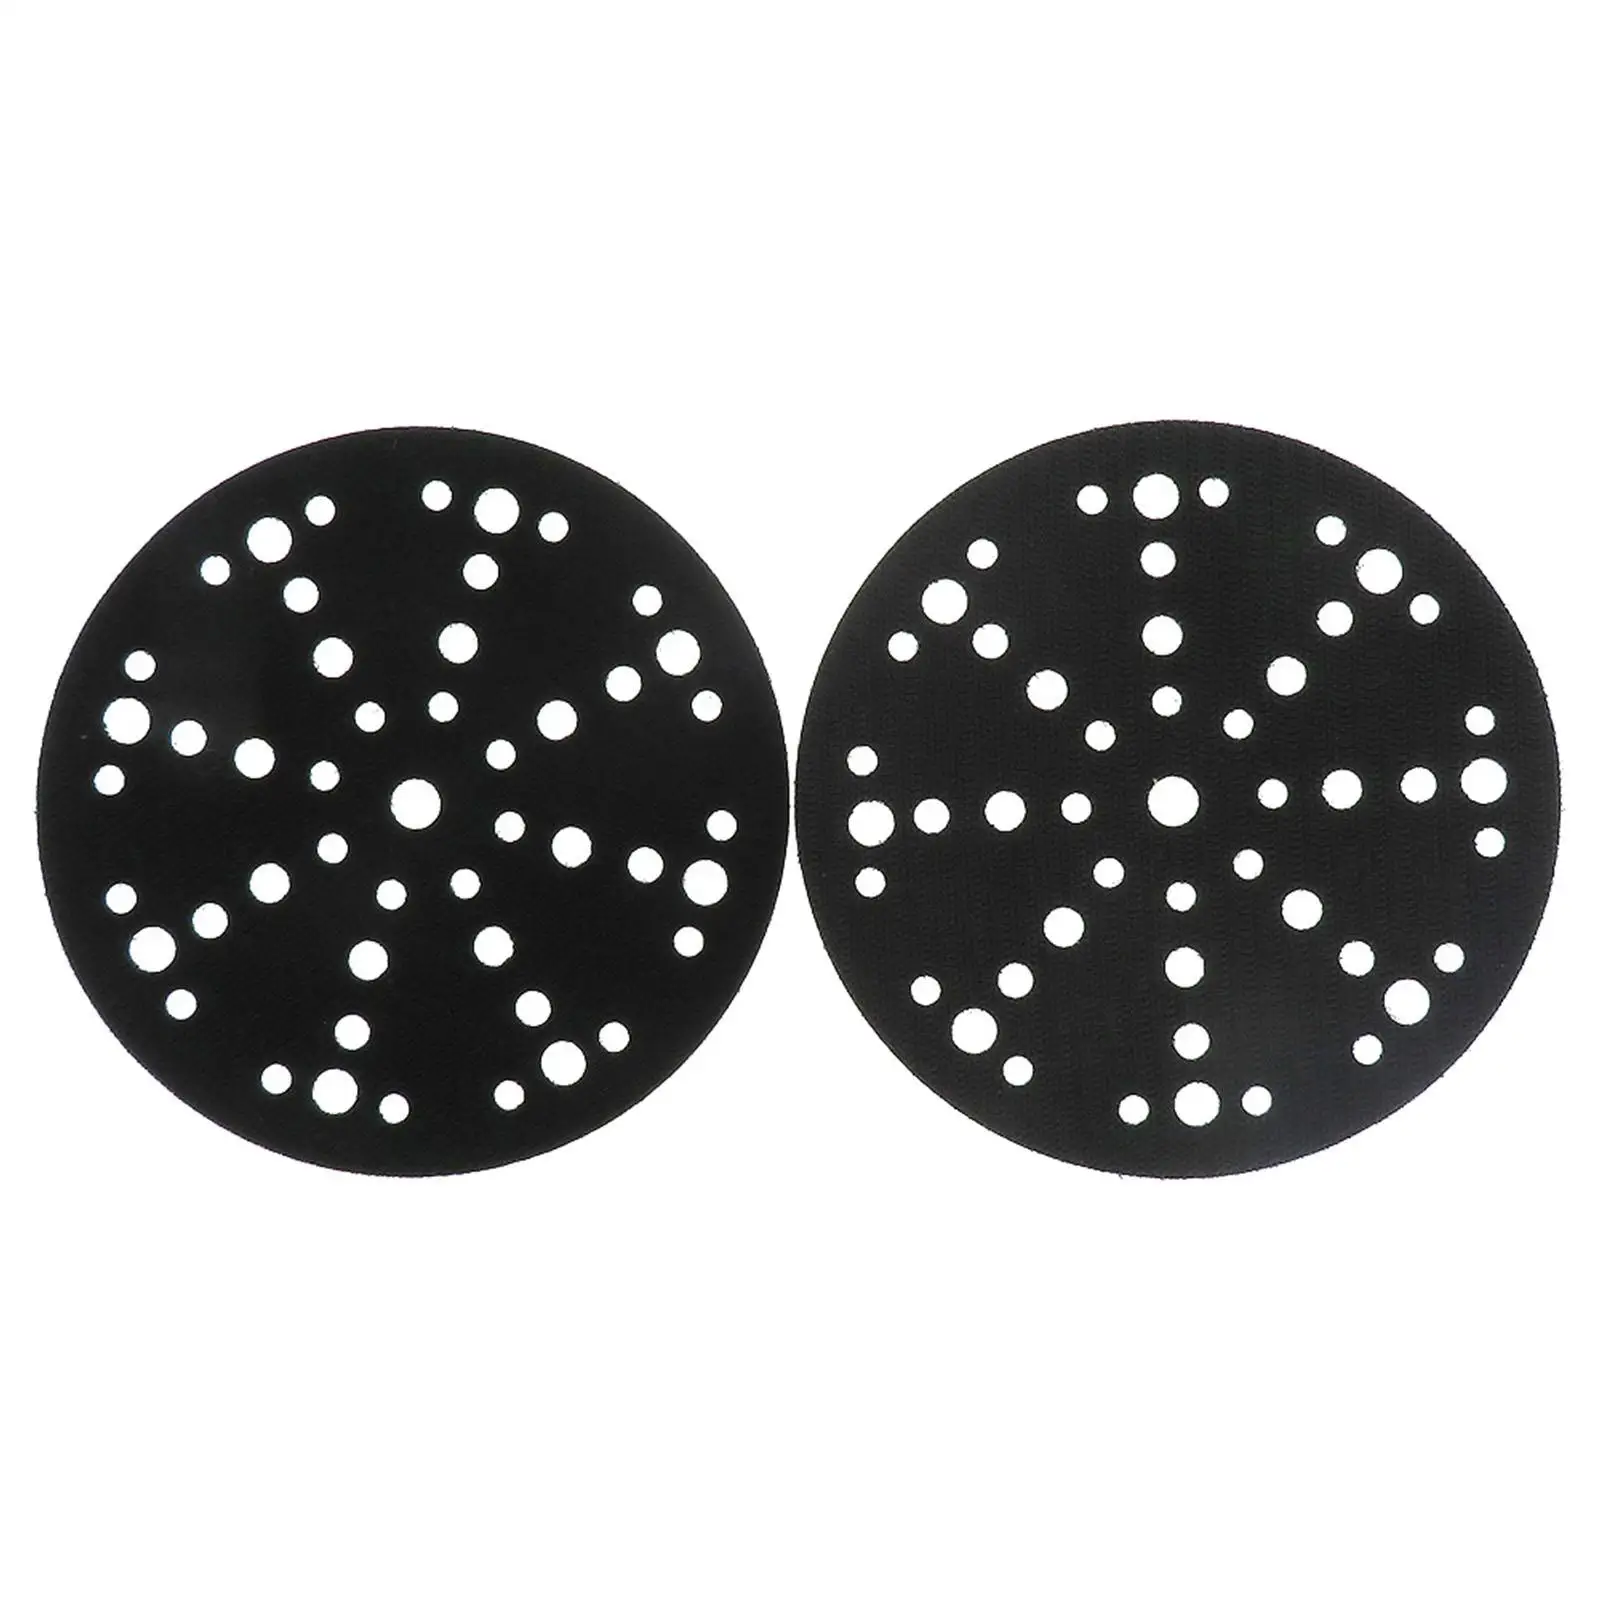 2 Pieces Replace Part Polishing Backing Pads 6in 48 Holes for Woodworking